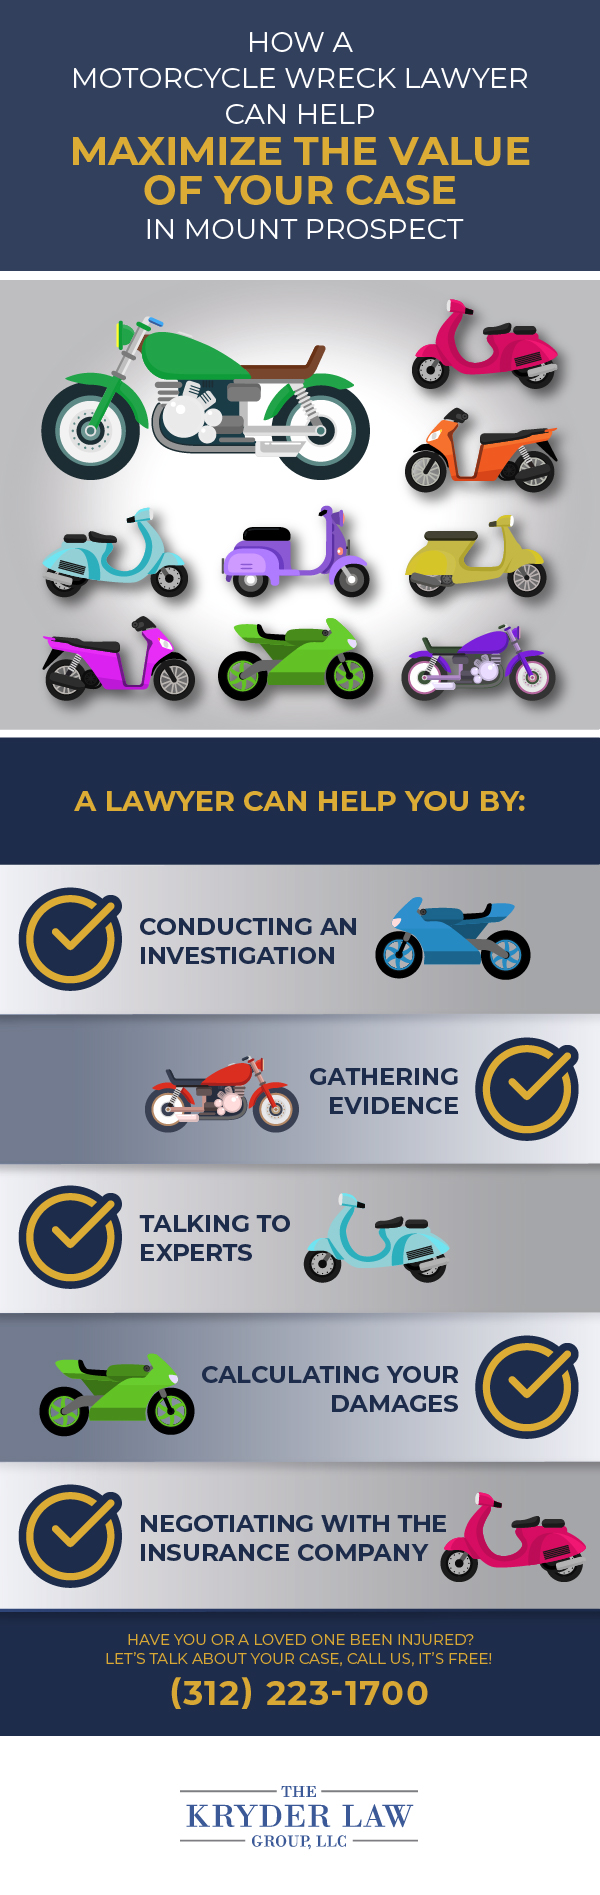 How a Motorcycle Wreck Lawyer Can Help Maximize the Value of Your Case in Mount Prospect Infographic